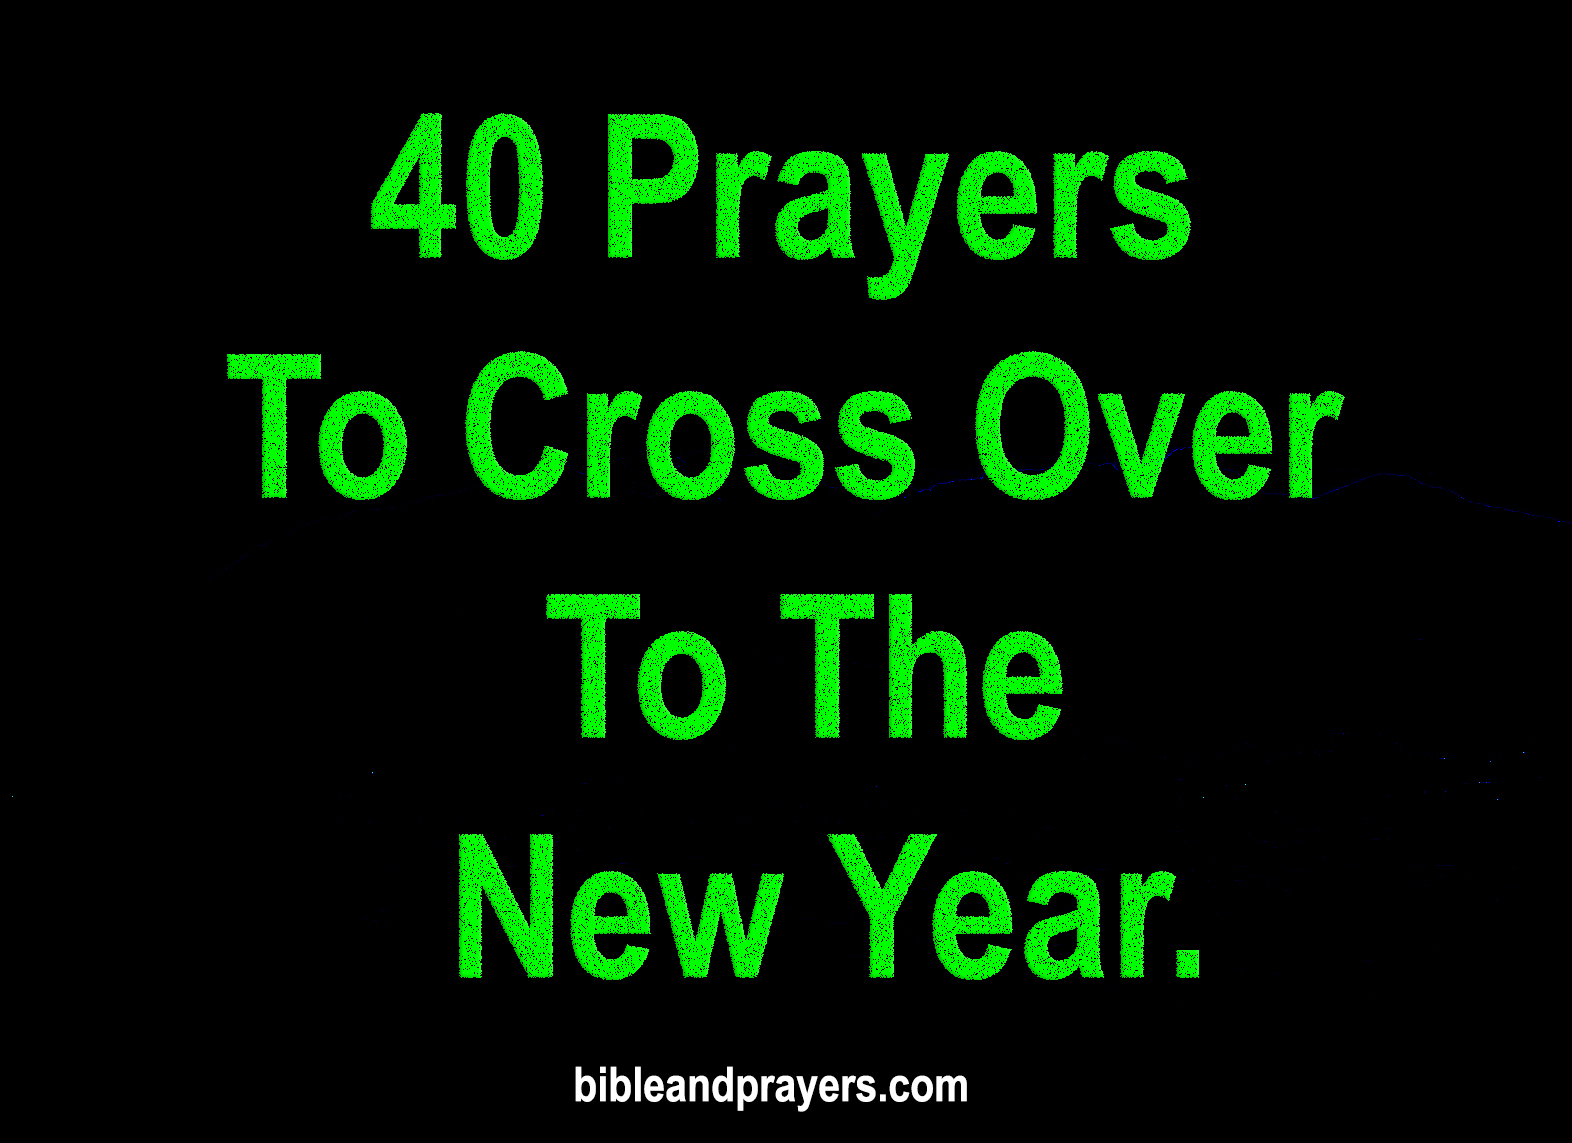 40 Prayers To Cross Over To The New Year.